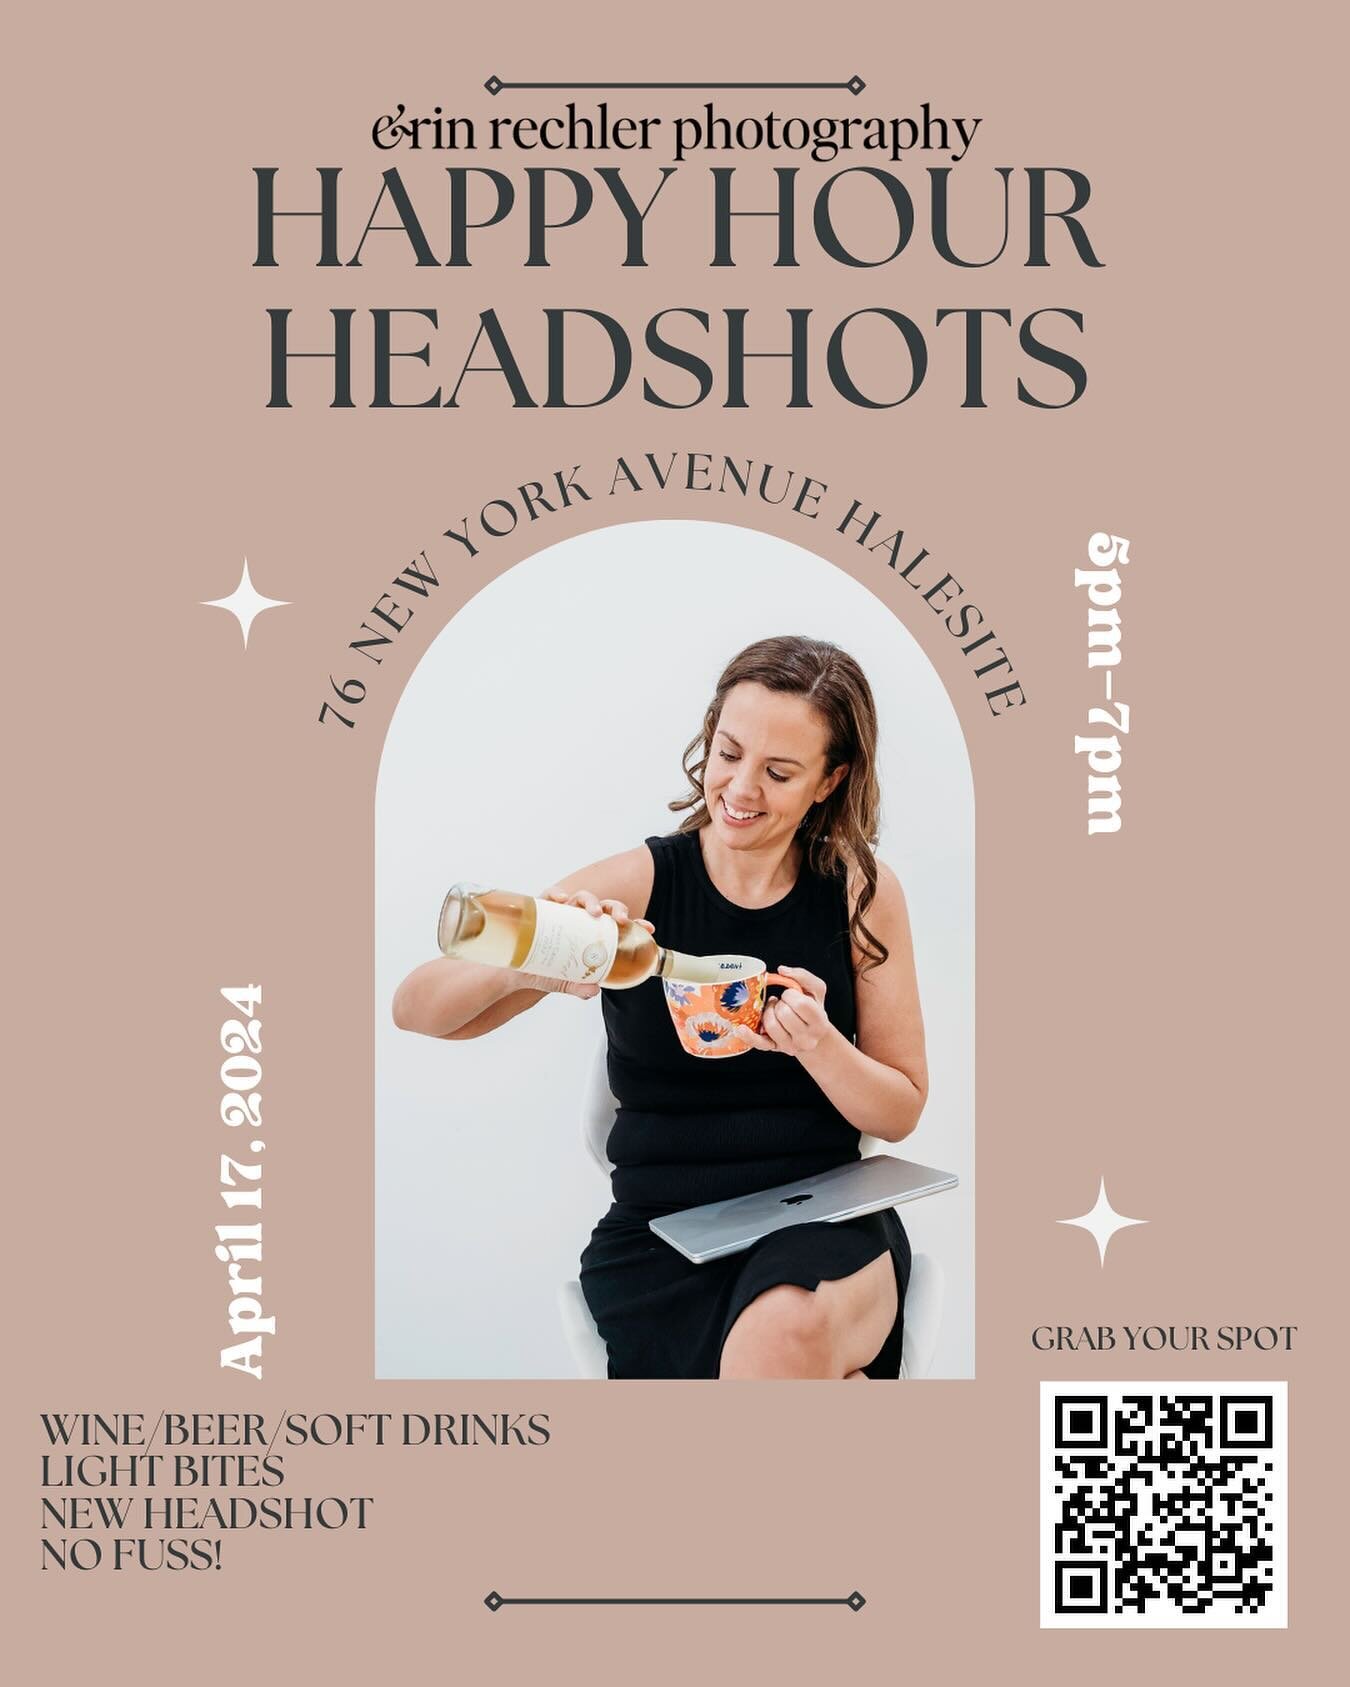 INTRODUCING&hellip; HAPPY HOUR HEADSHOTS 🙌 🥂 

I get it, getting your headshot done is HARD. You feel awkward, what do you do with your hands, and it&rsquo;s usually in the back of an office&hellip;I know many of you push it to the bottom of your t